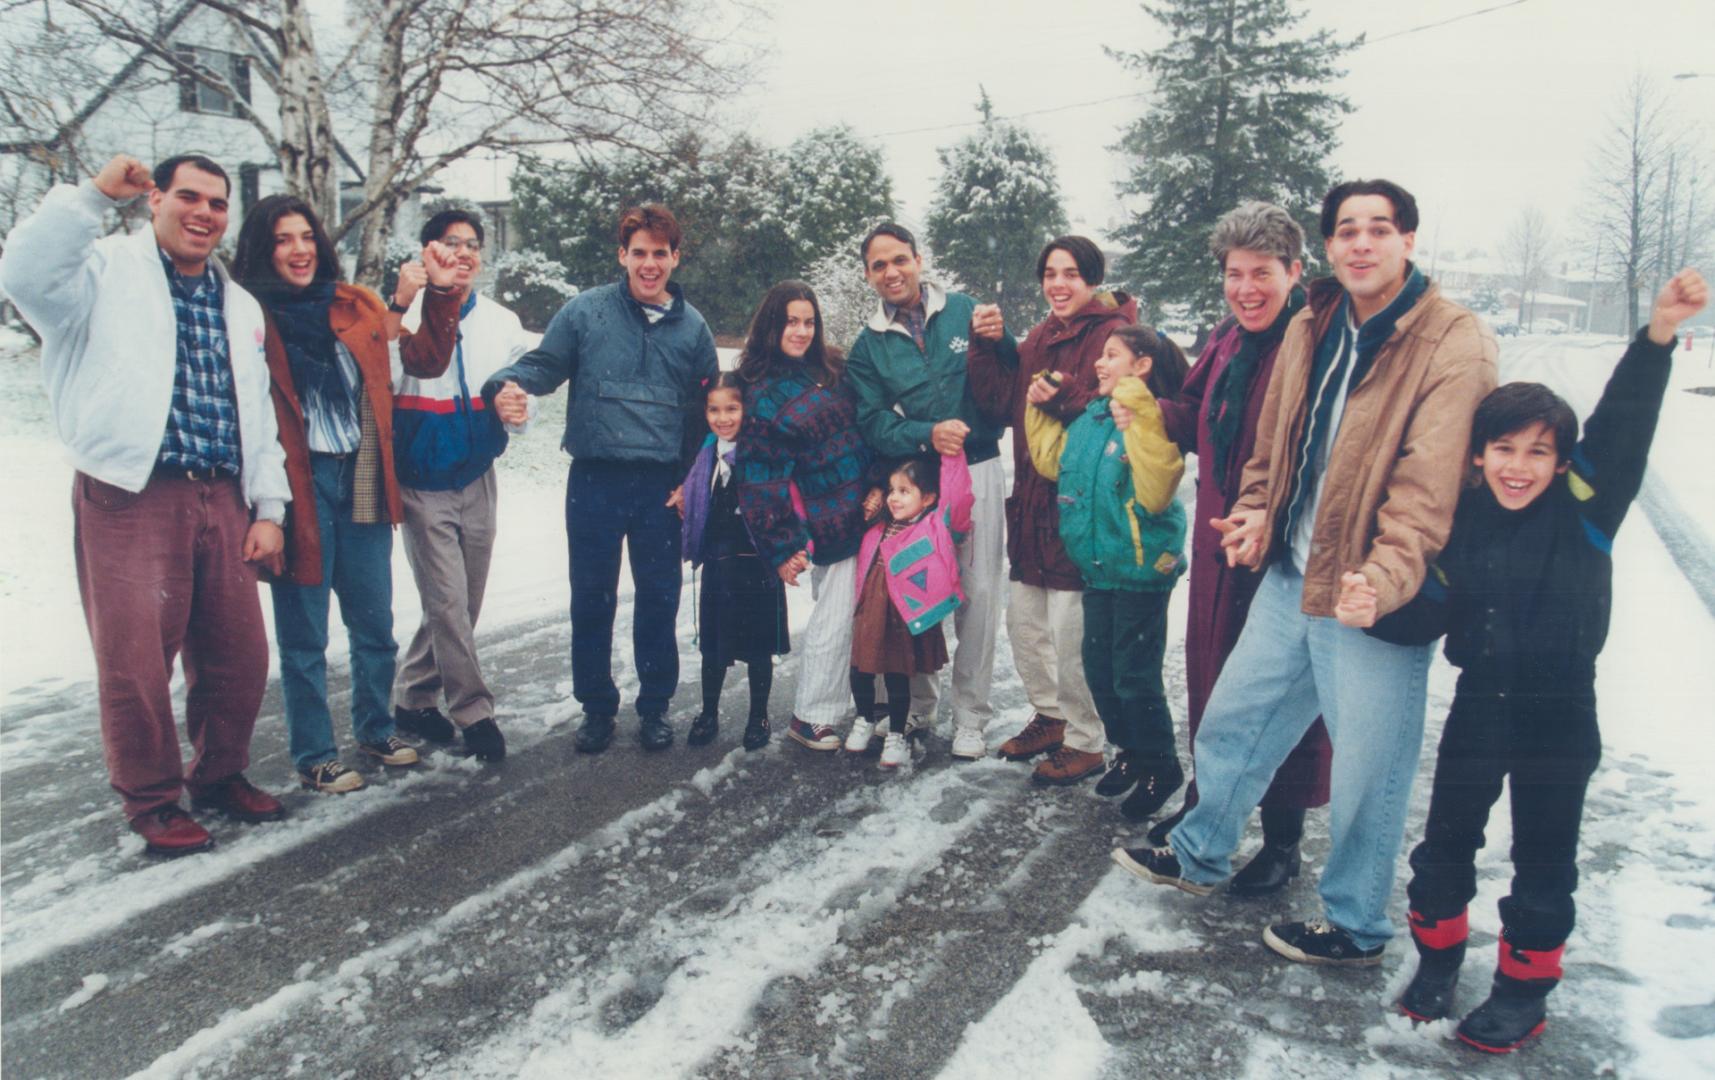 With 11 children, the Rebello family is a far cry from the Canadian average of 1